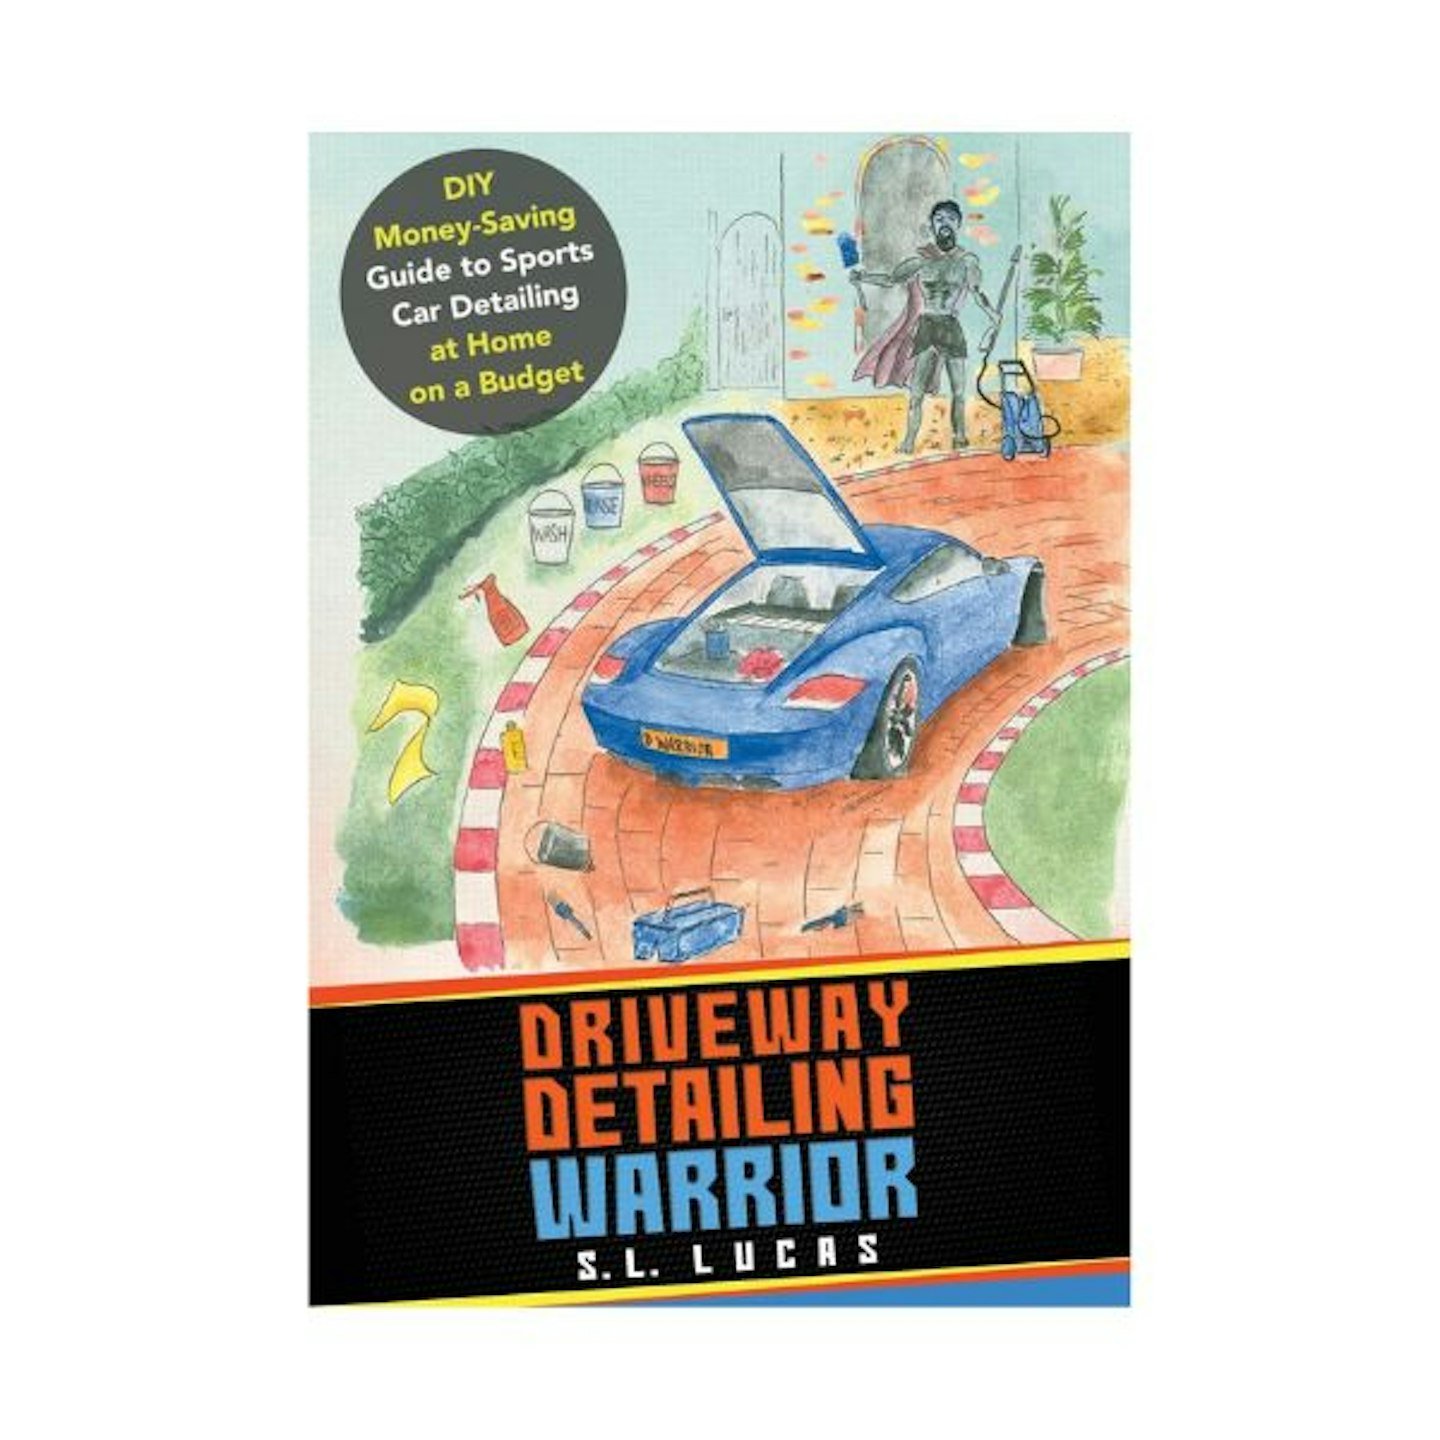 Driveway Detailing Warrior: DIY Money-Saving Guide to Sports Car Detailing at Home on a Budget